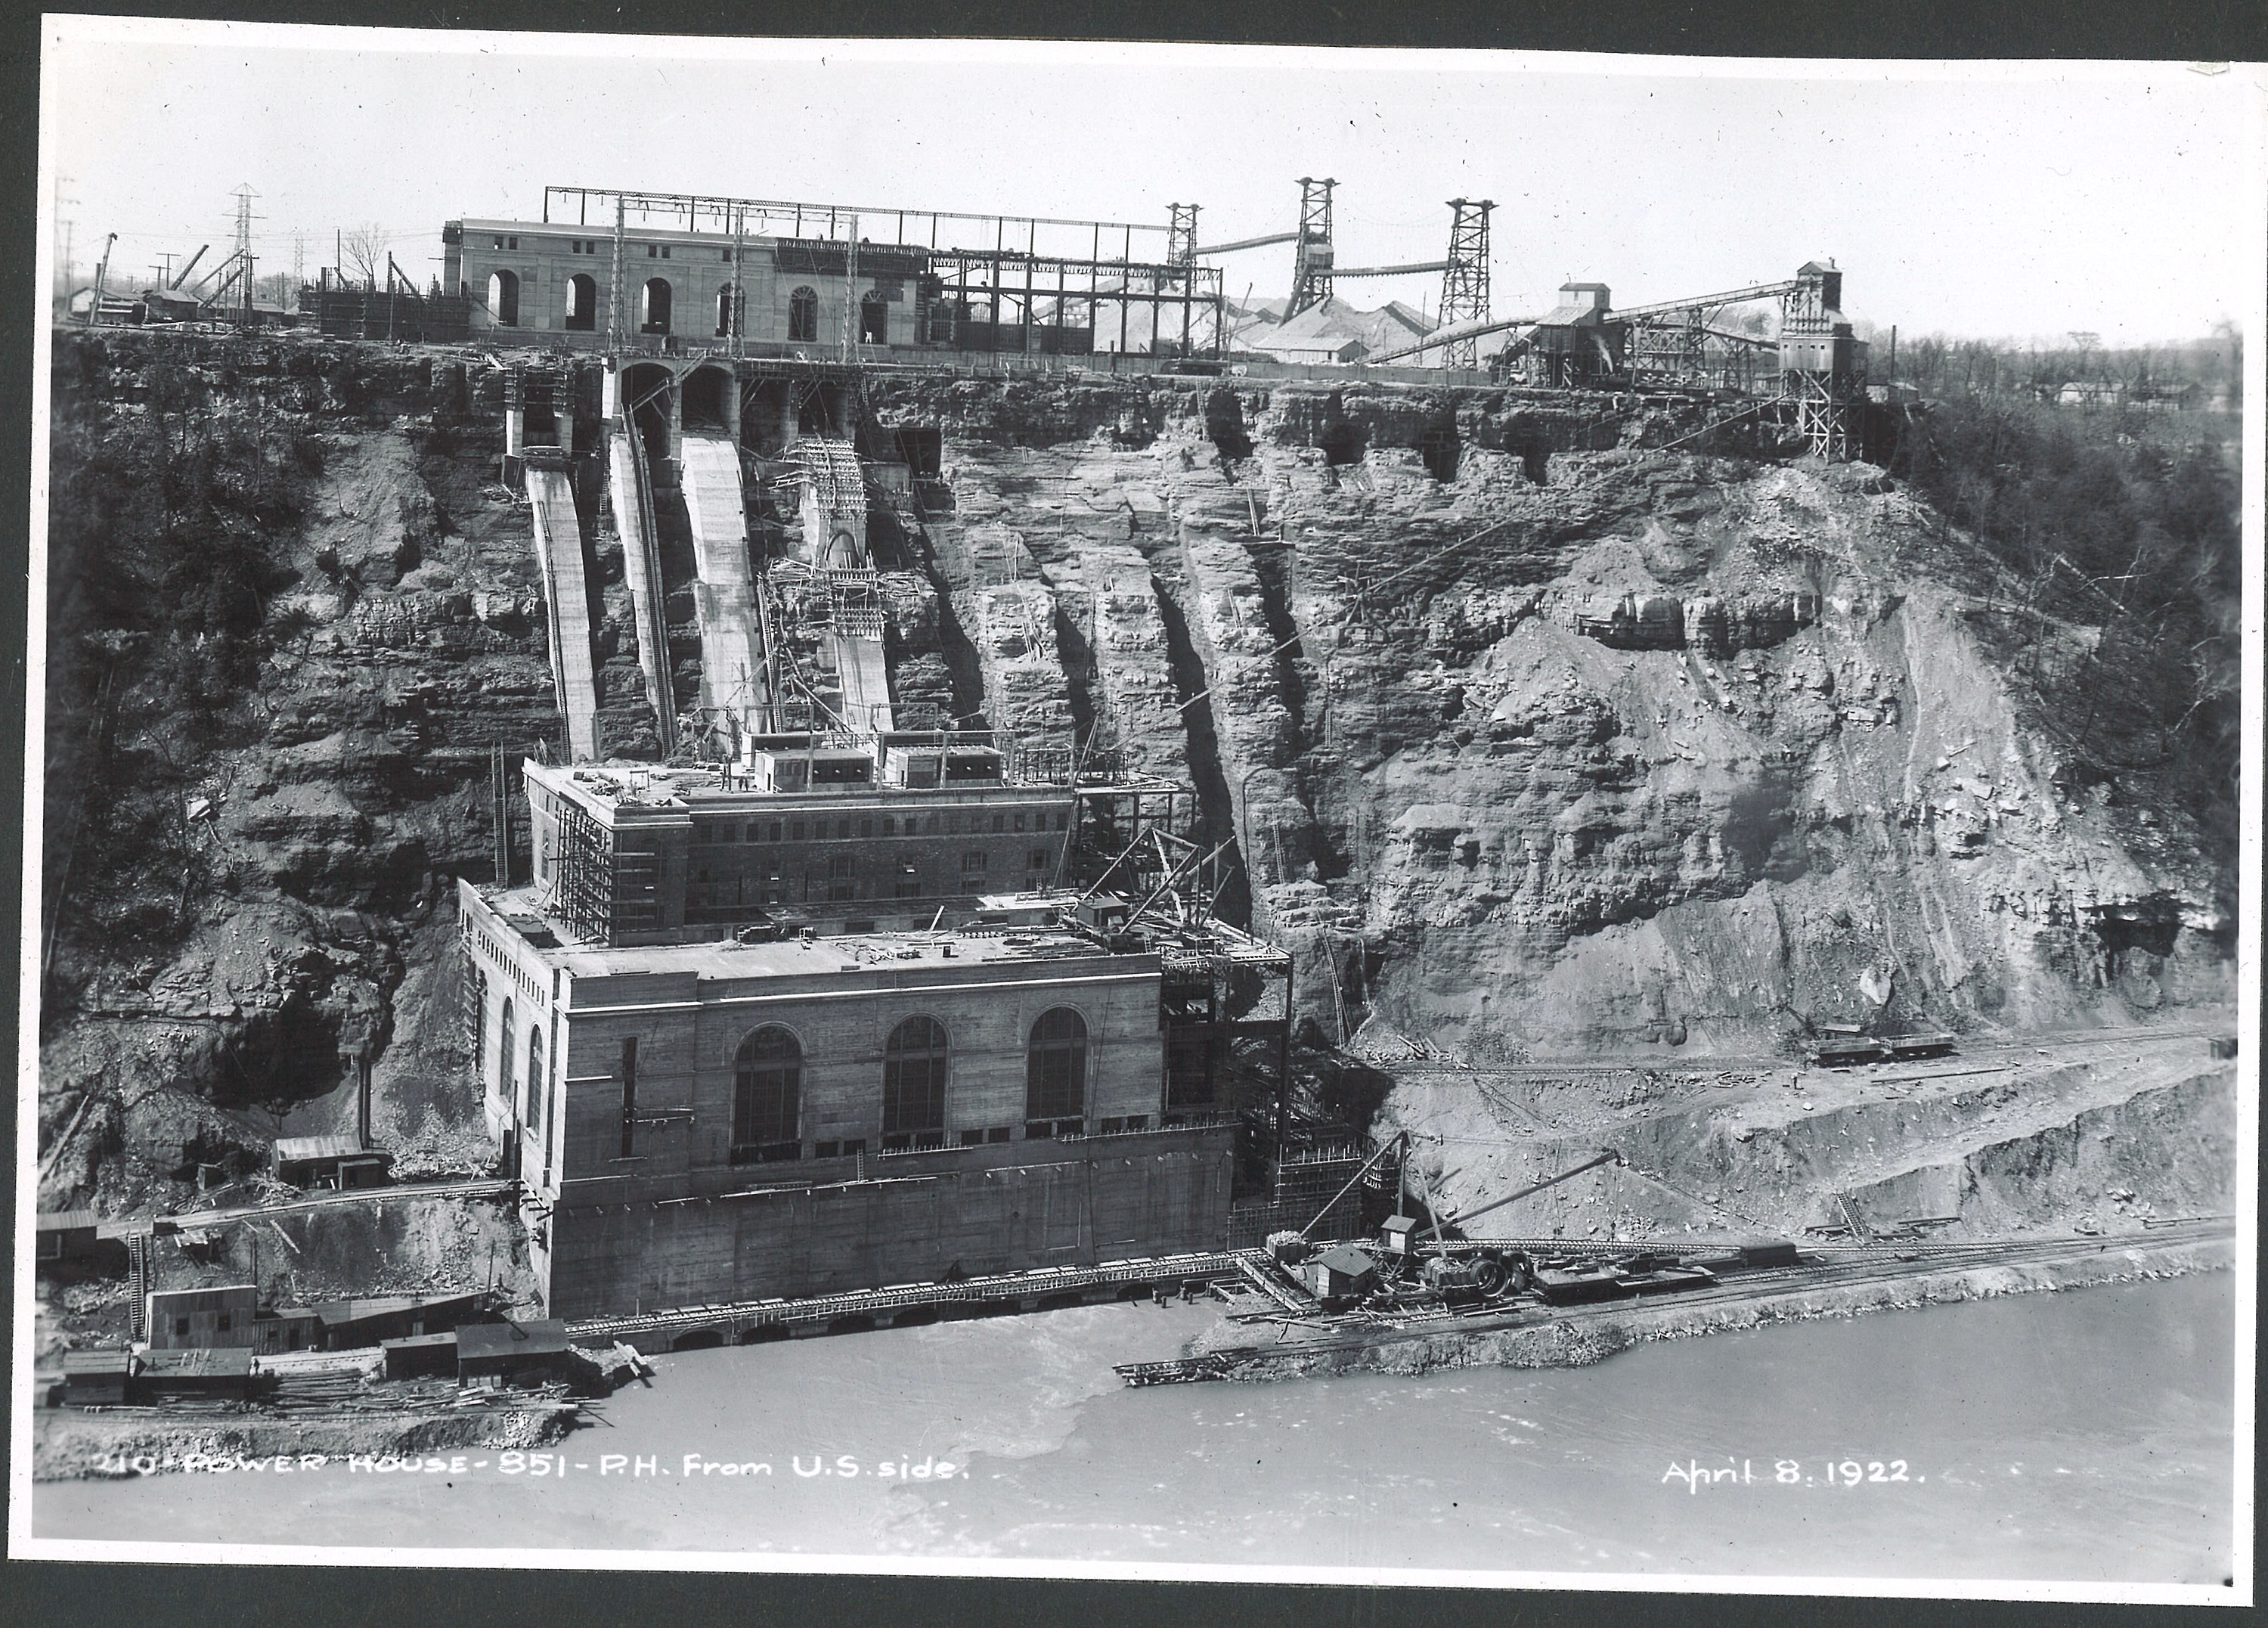 The Sir Adam Beck I GS powerhouse, then called the Queenston-Chippawa Hydroelectric Plant, under construction.